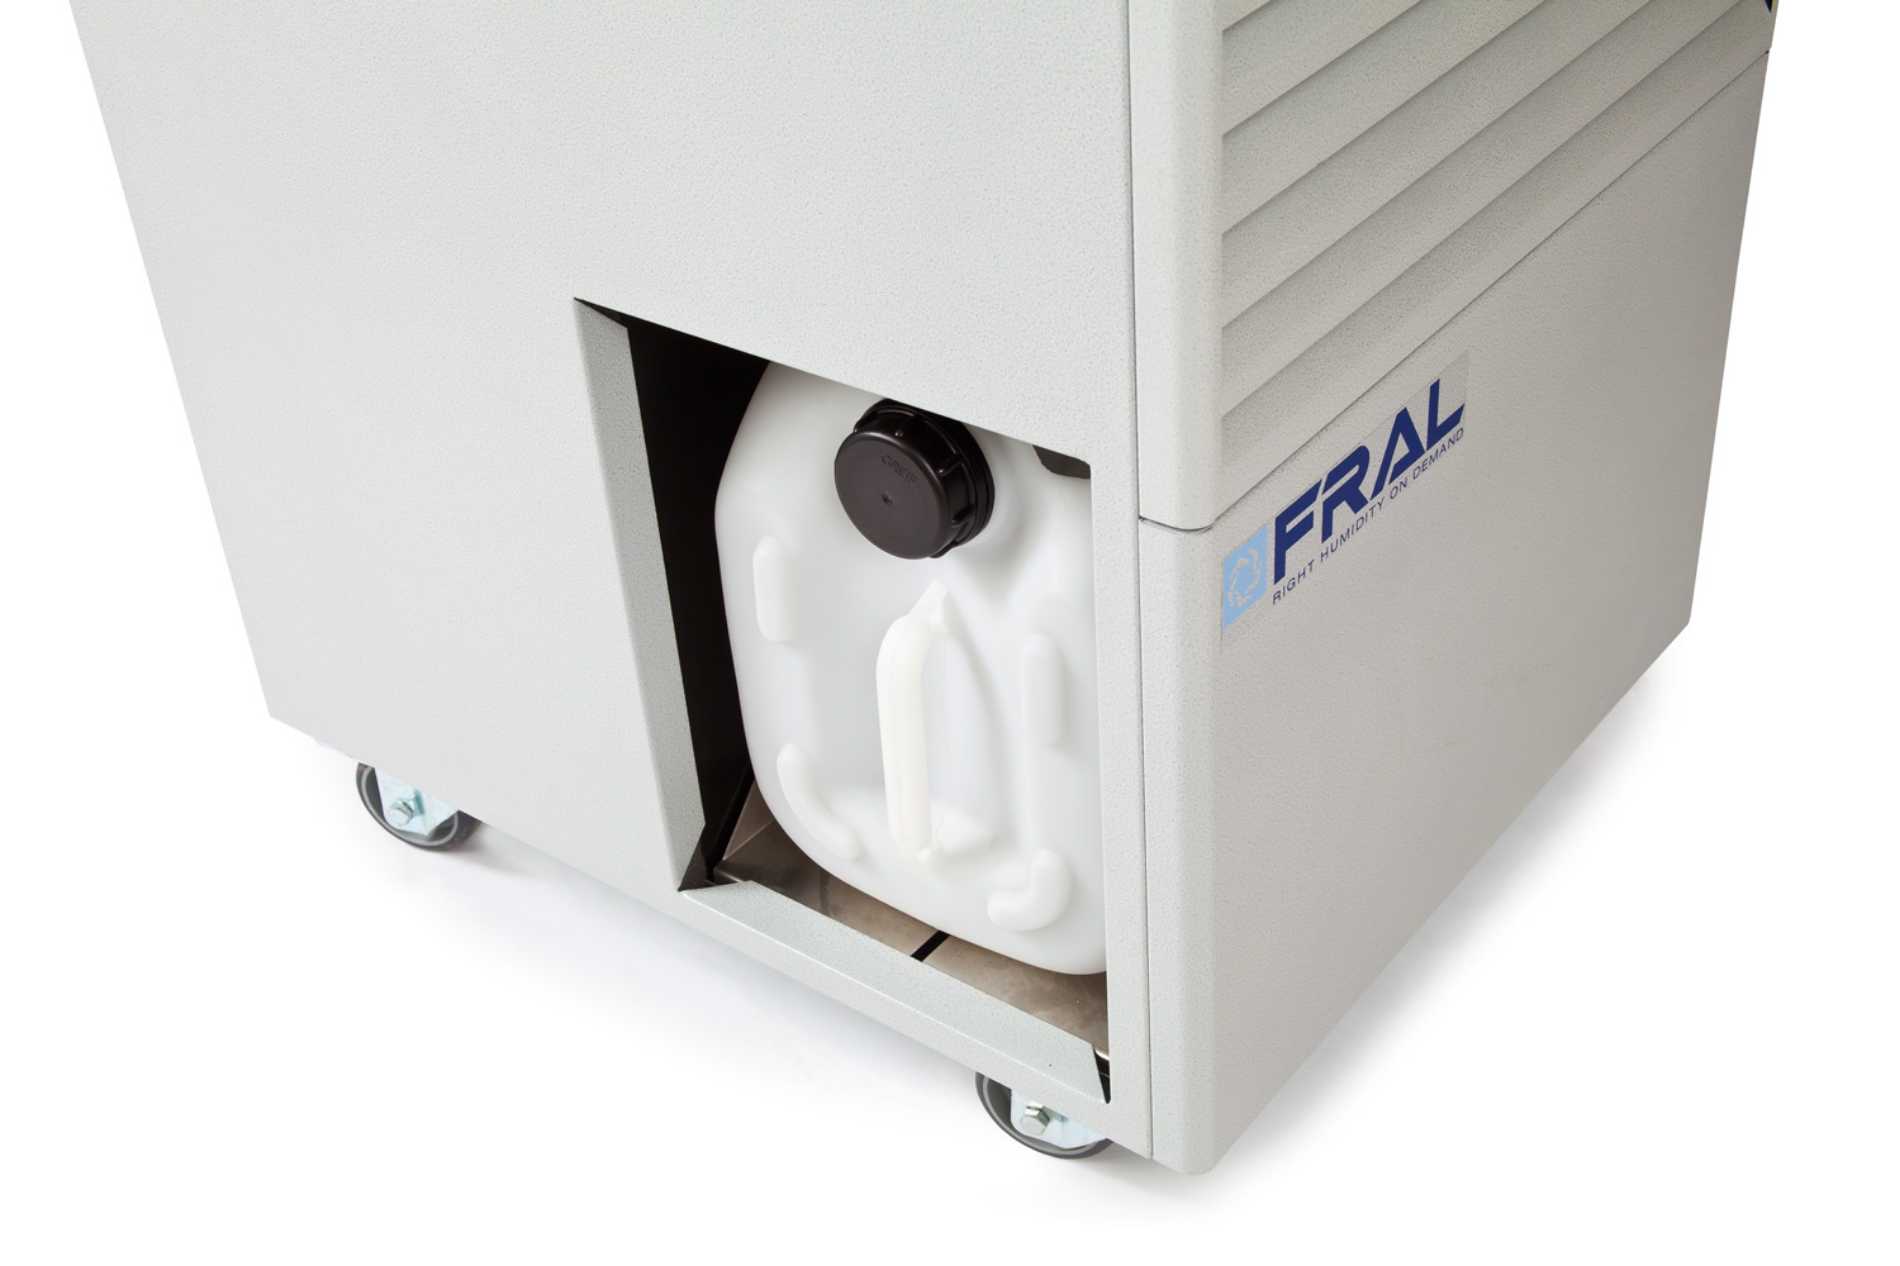 Fral Blizzard 7.3kw Industrial Portable Air Conditioning Unit top tank